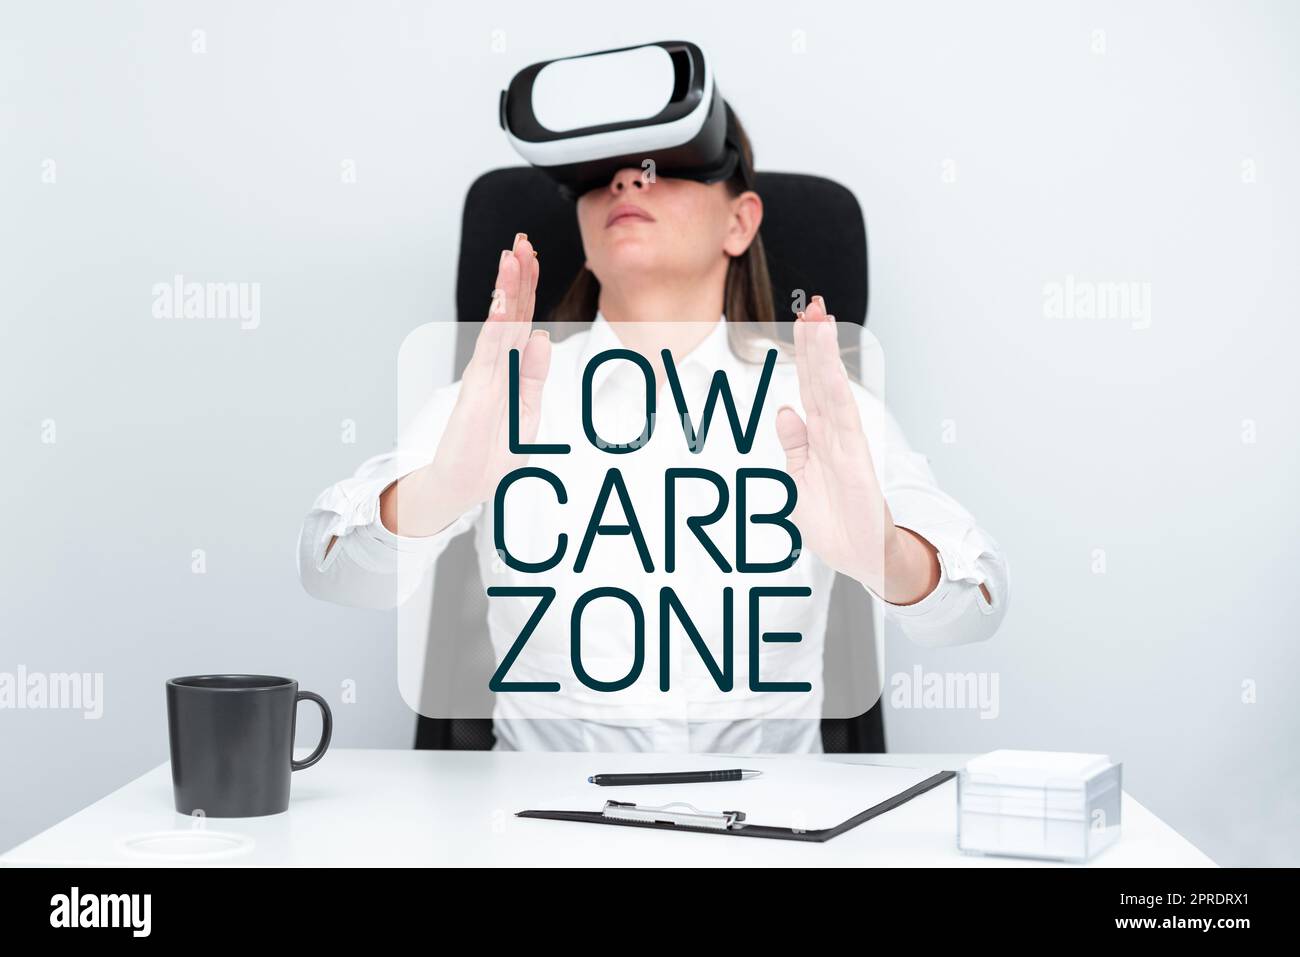 Text showing inspiration Low Carb Zone. Word Written on Healthy diet for losing weight eating more proteins sugar free Woman Wearing Headset And Learning Skill Over Virtual Reality Simulator. Stock Photo